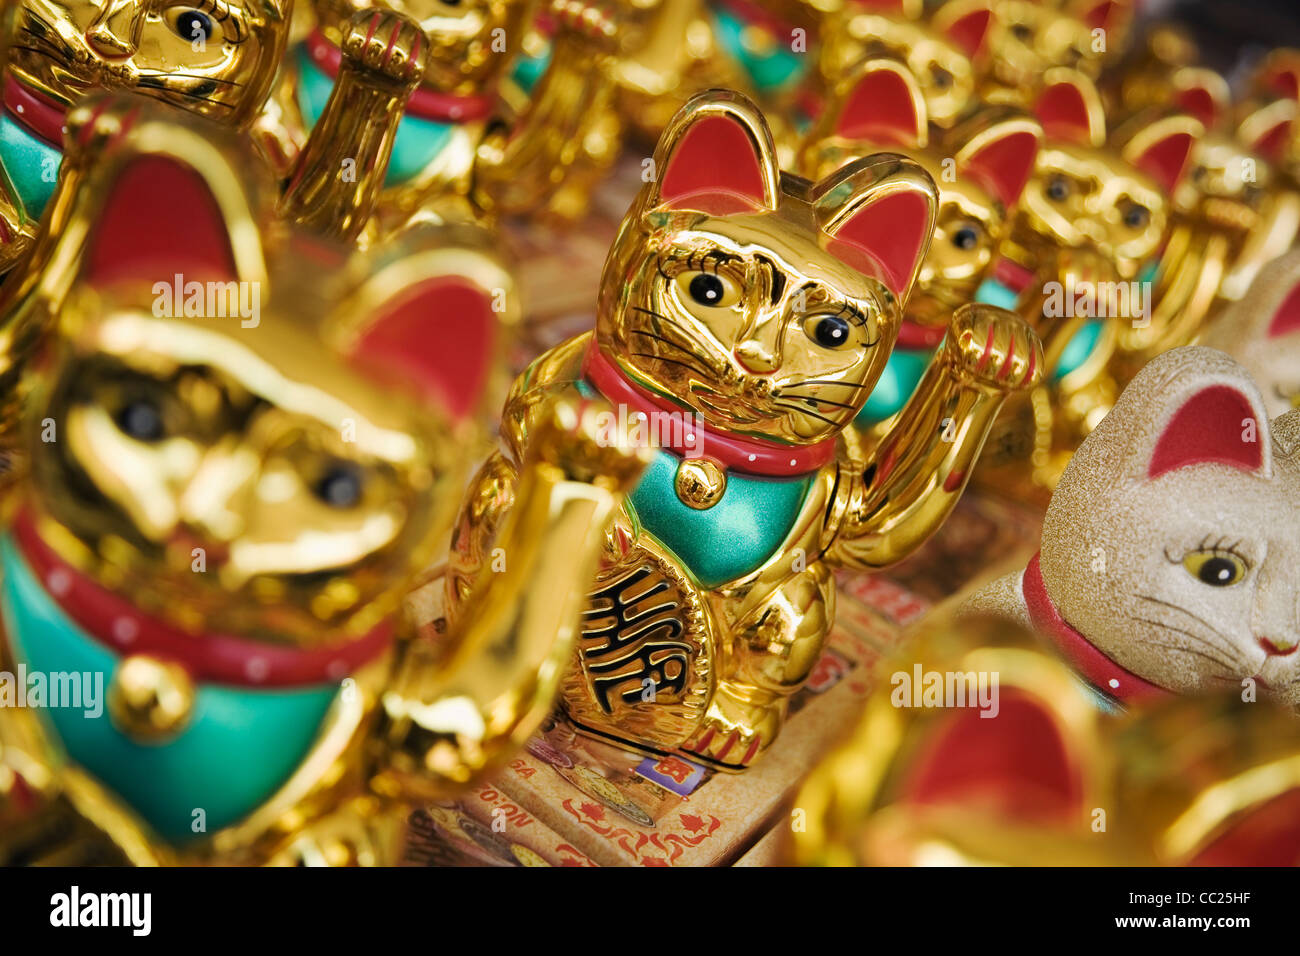 A 'Welcoming Cat' (also known as Maneki Neko) - which is popular in Chinese and Japanese culture as a symbol of good fortune. Ch Stock Photo